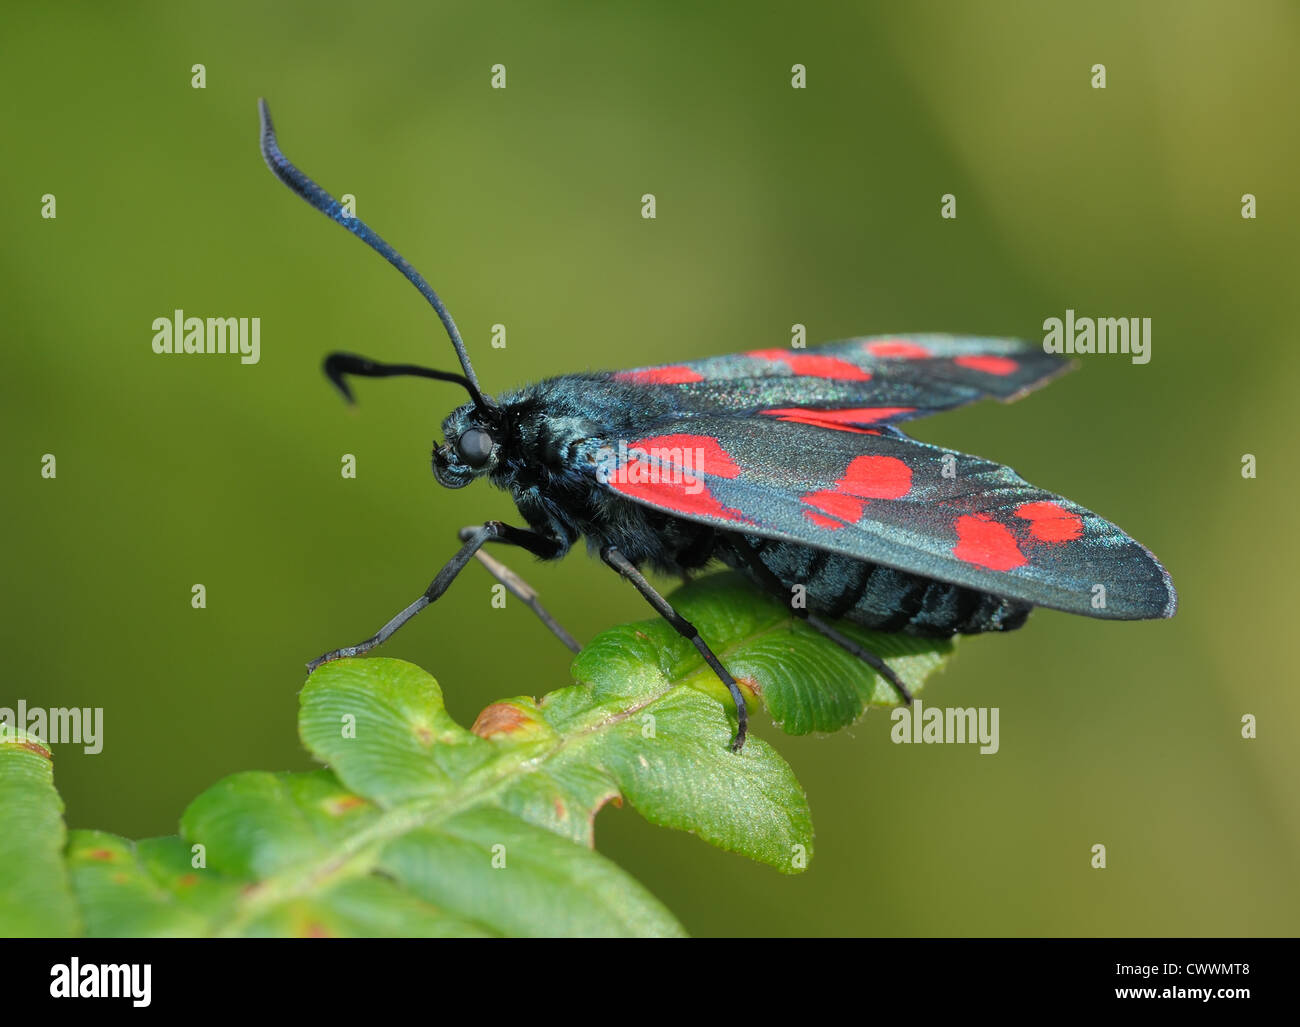 The bright, spotted butterfly Zygaena filipendulae on a lief Stock Photo